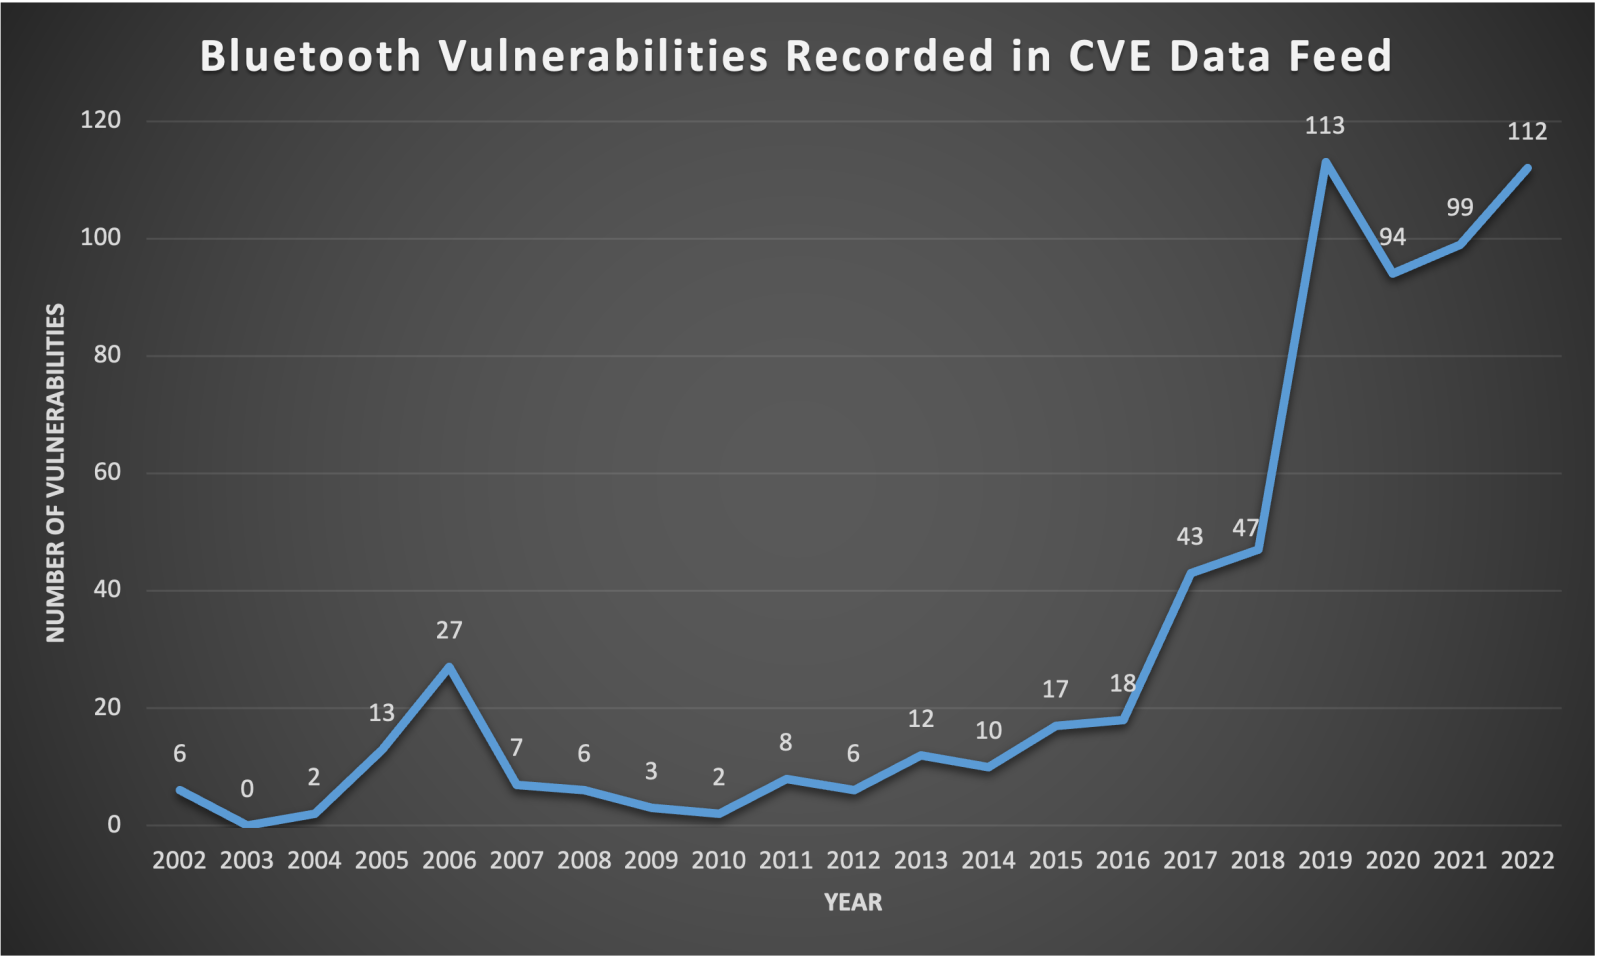 Bluetooth Vulnerabilities from the Year 2002 to 2022